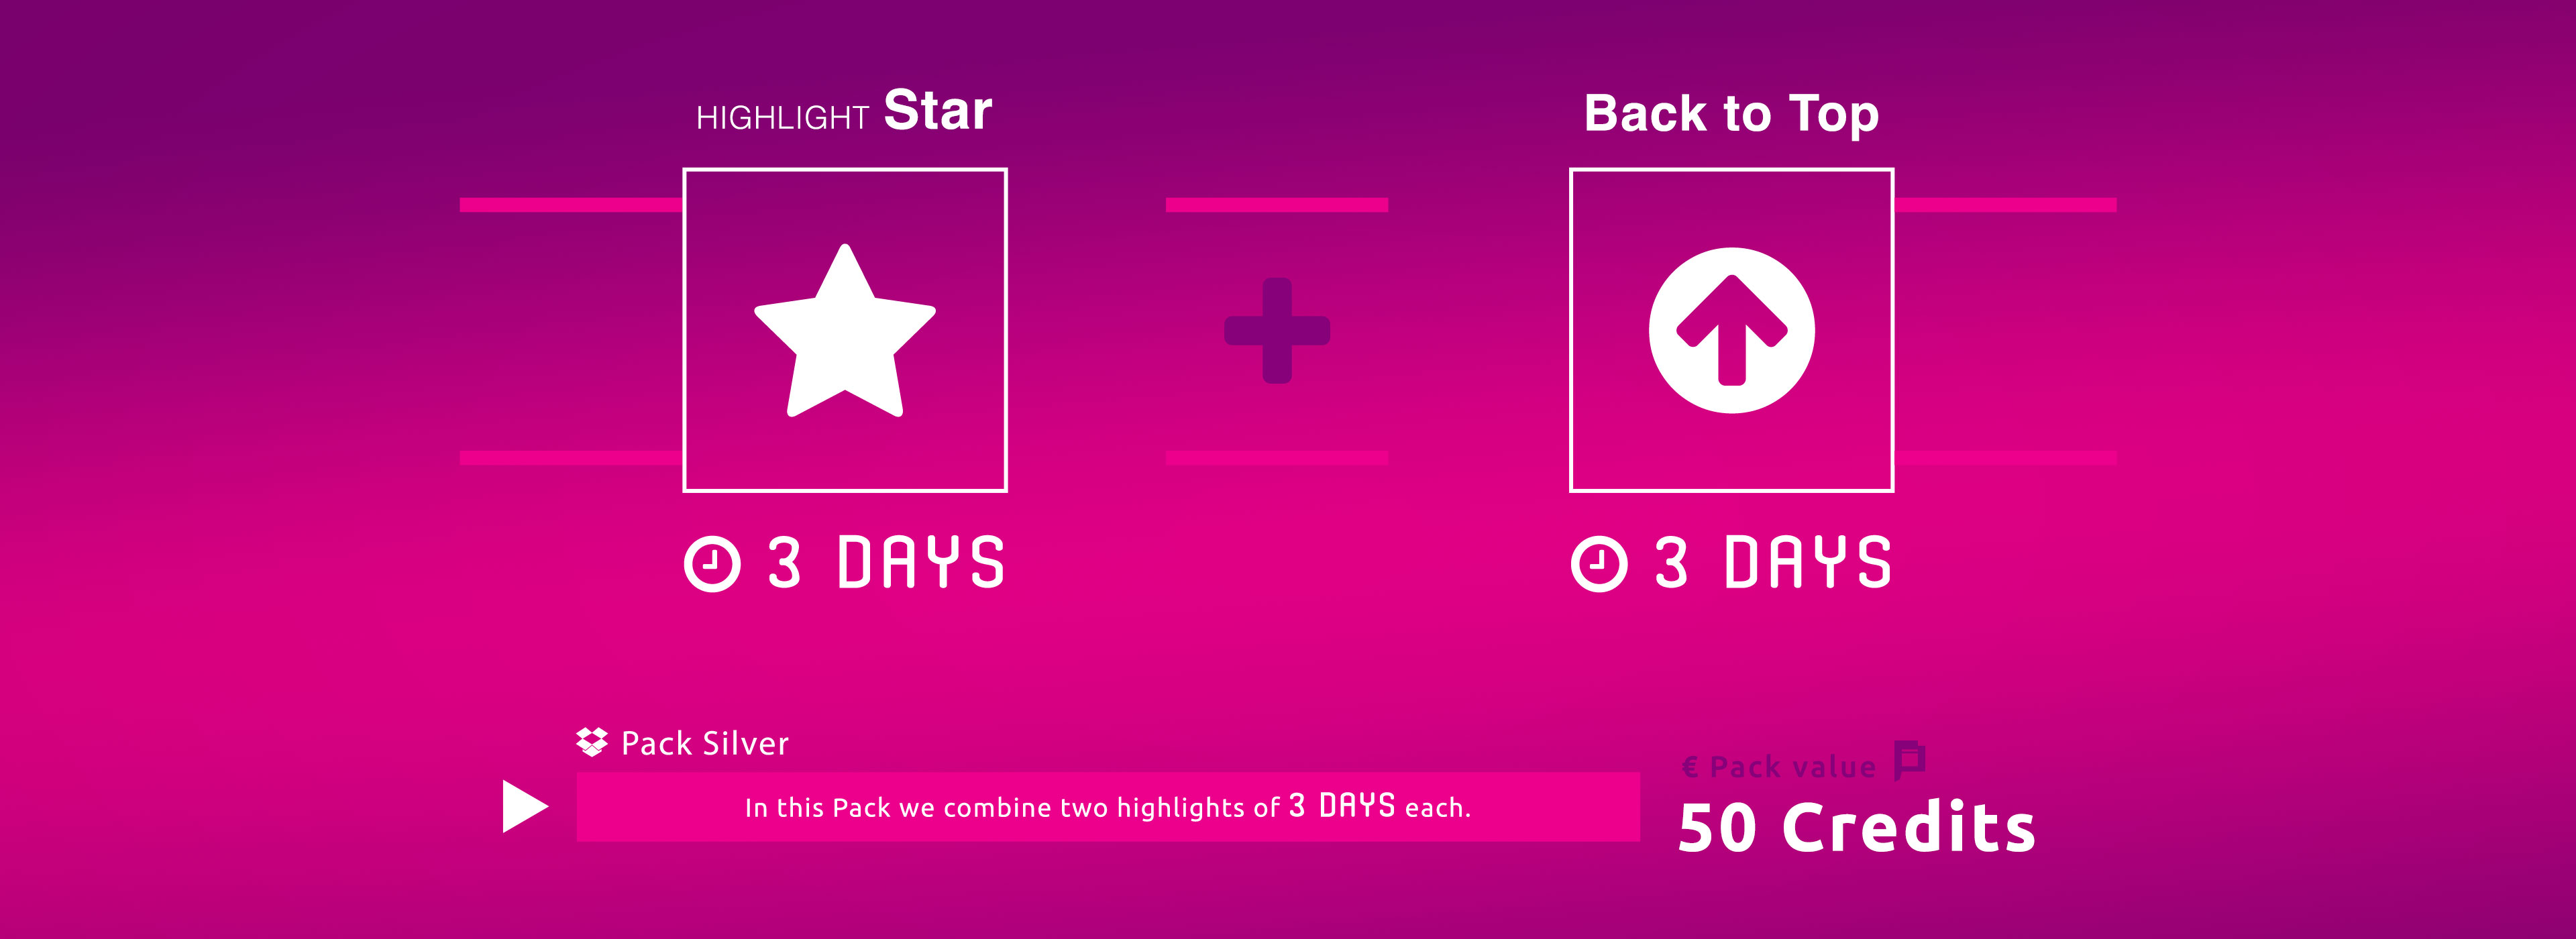 With Silver Pack your ad will be published with 1 Star Highlight for 3 days plus 1 Back to Top Highlights for 3 days. For the total valid period of 6 days your ad will always be highlighted.